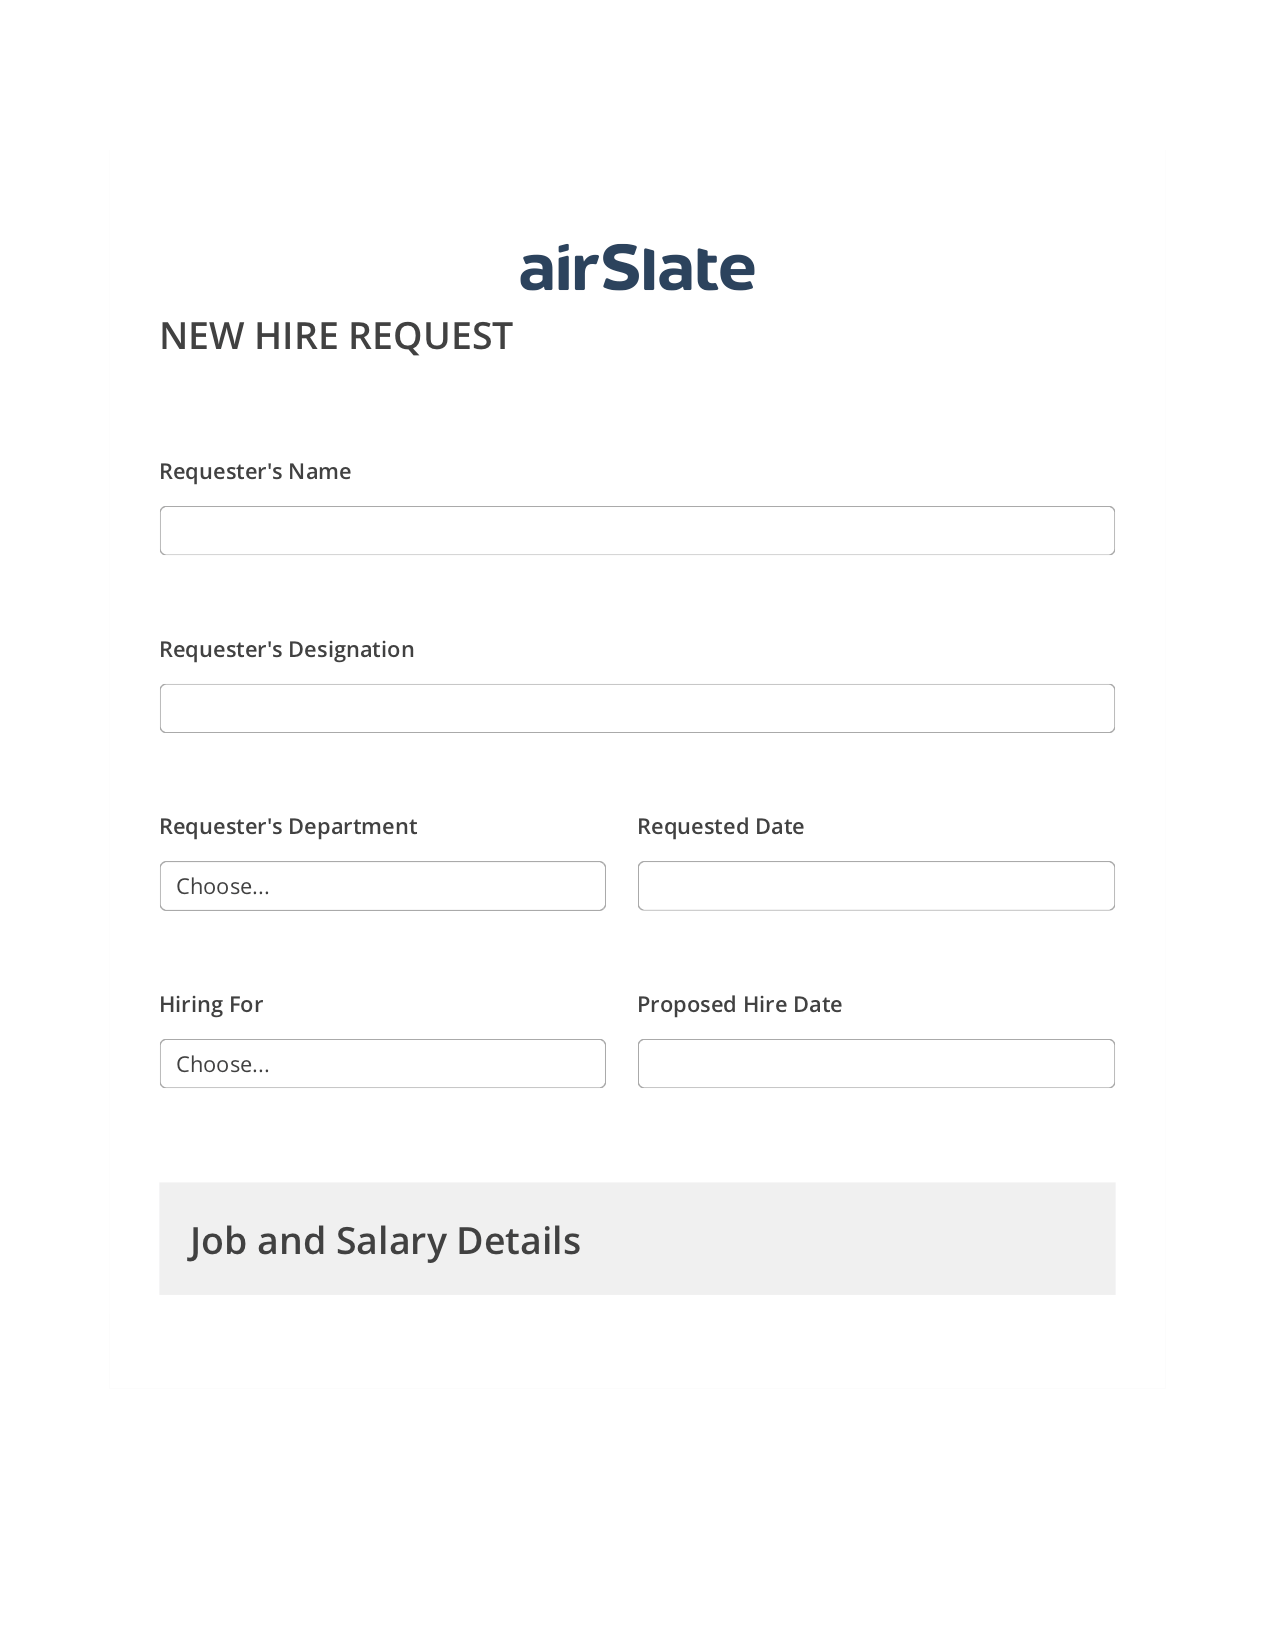 Hiring Request Workflow Pre-fill from MySQL Bot, Google Sheet Two-Way Binding Bot, Archive to OneDrive Bot